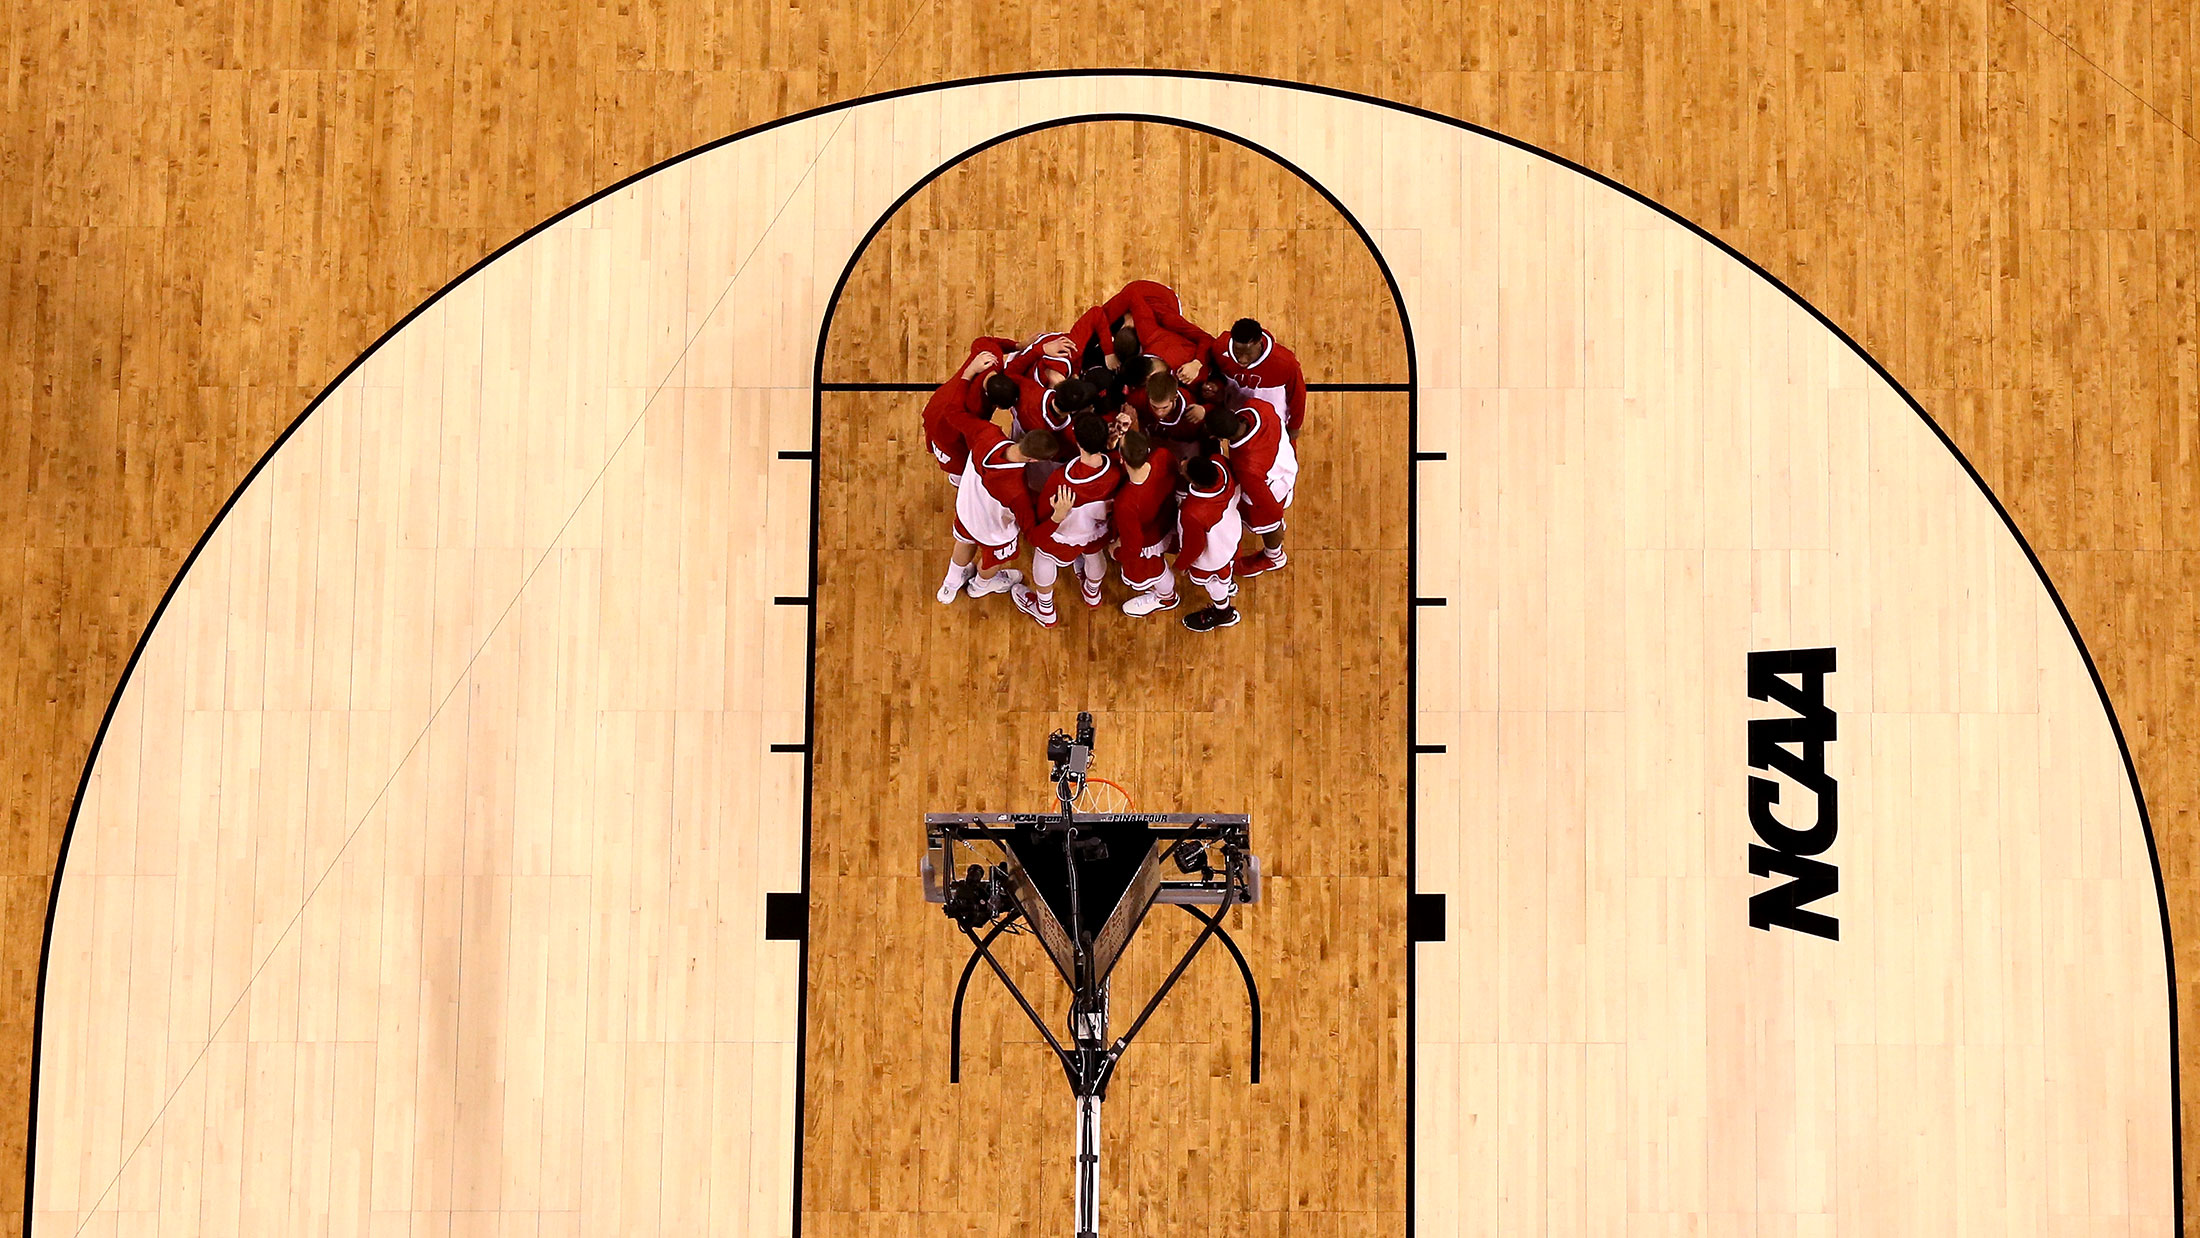 The Wisconsin Badgers huddle before taking on the Duke Blue Devils in the NCAA championship game on April 6 at Lucas Oil Stadium in Indianapolis.
